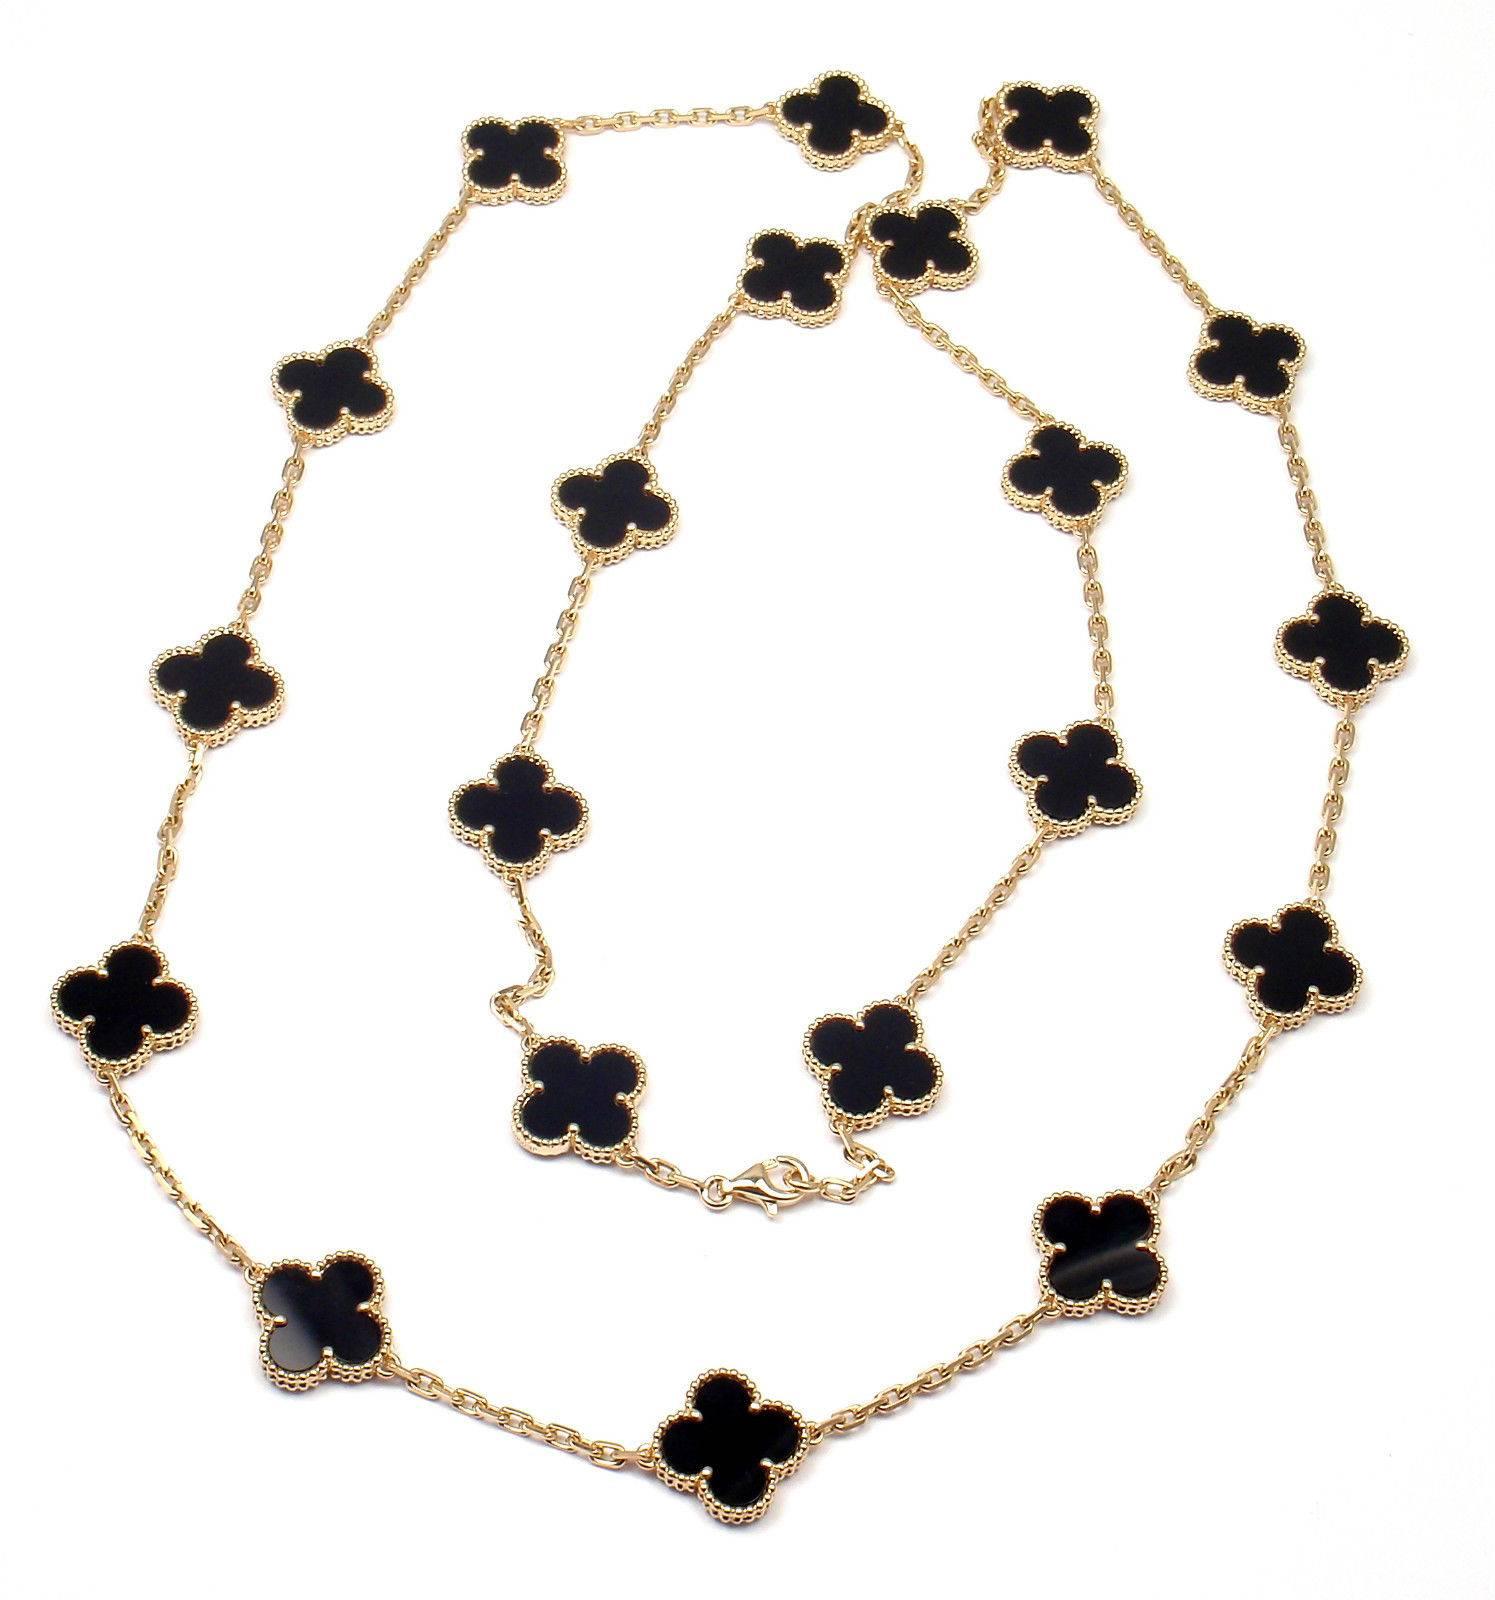 18k Yellow Gold Alhambra Twenty-Motif Black Onyx Necklace by 
Van Cleef & Arpels, with 20 motifs of black onyx Alhambra stones, 15mm each.

Details: 
Length: 33.5